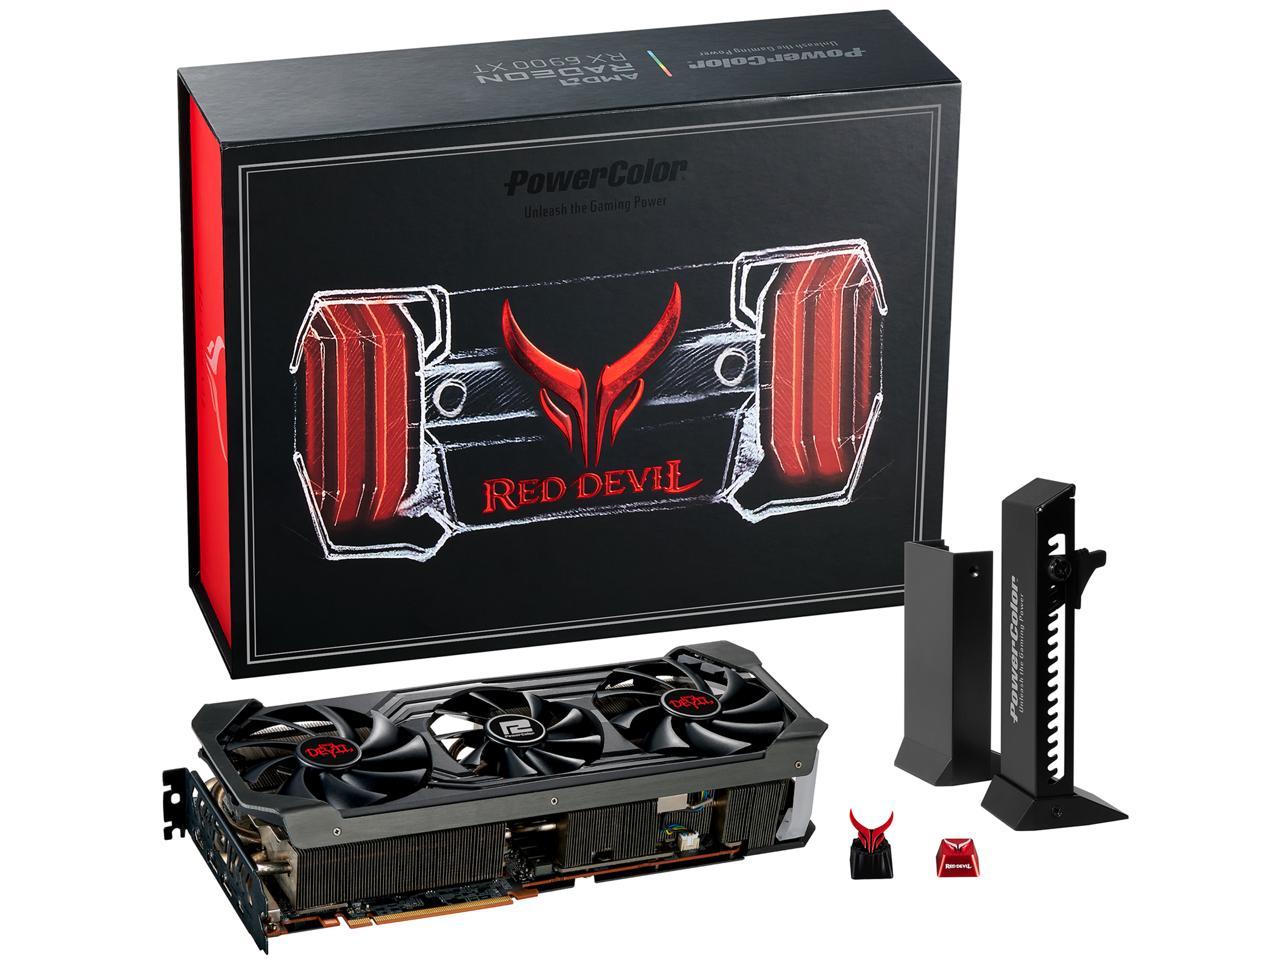 PowerColor Red Devil Limited Edition AMD Radeon RX 6900 XT